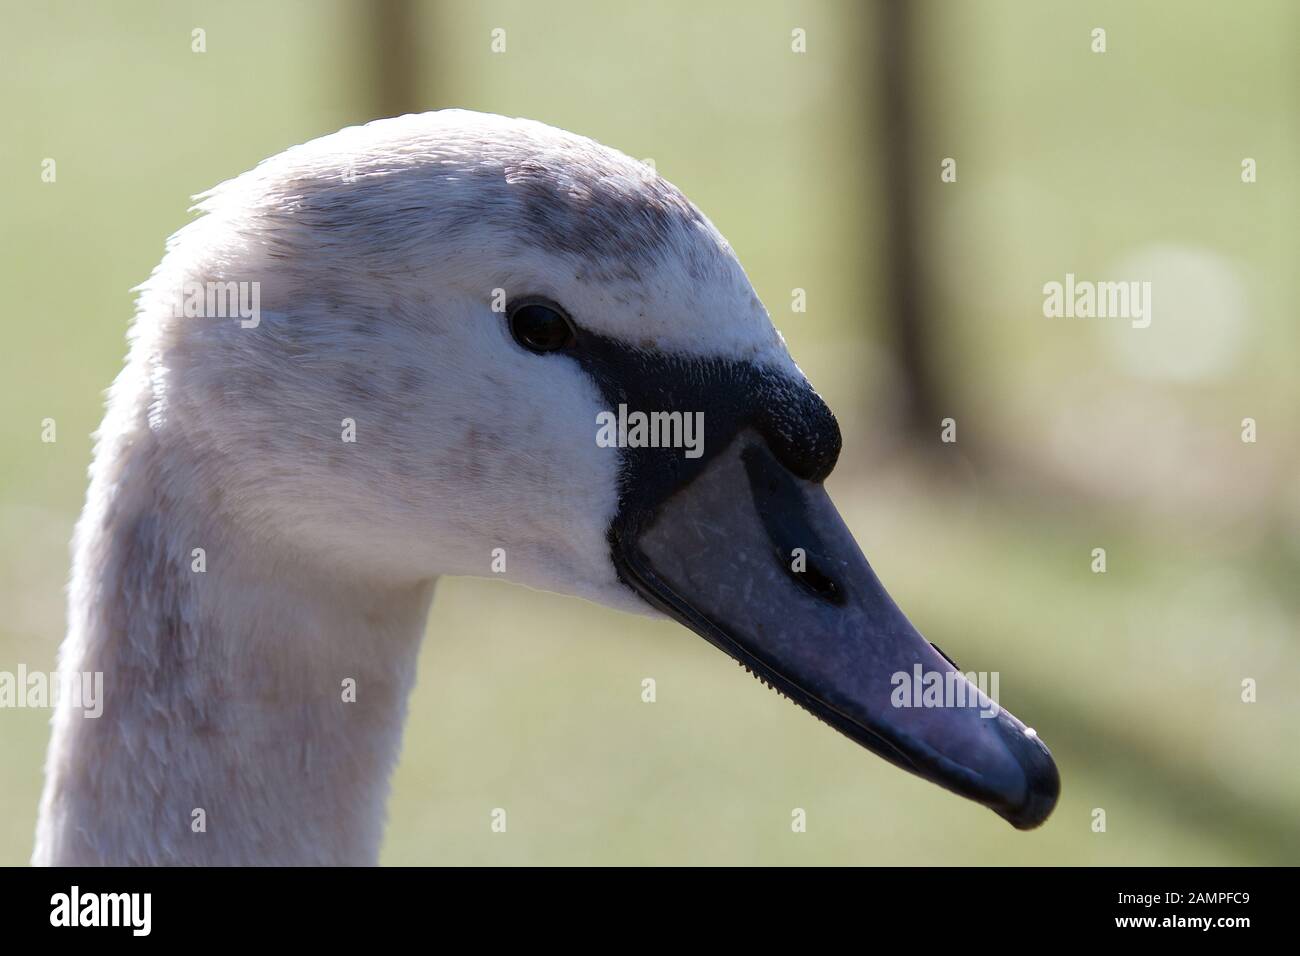 Close-up shot of a swan's head Stock Photo